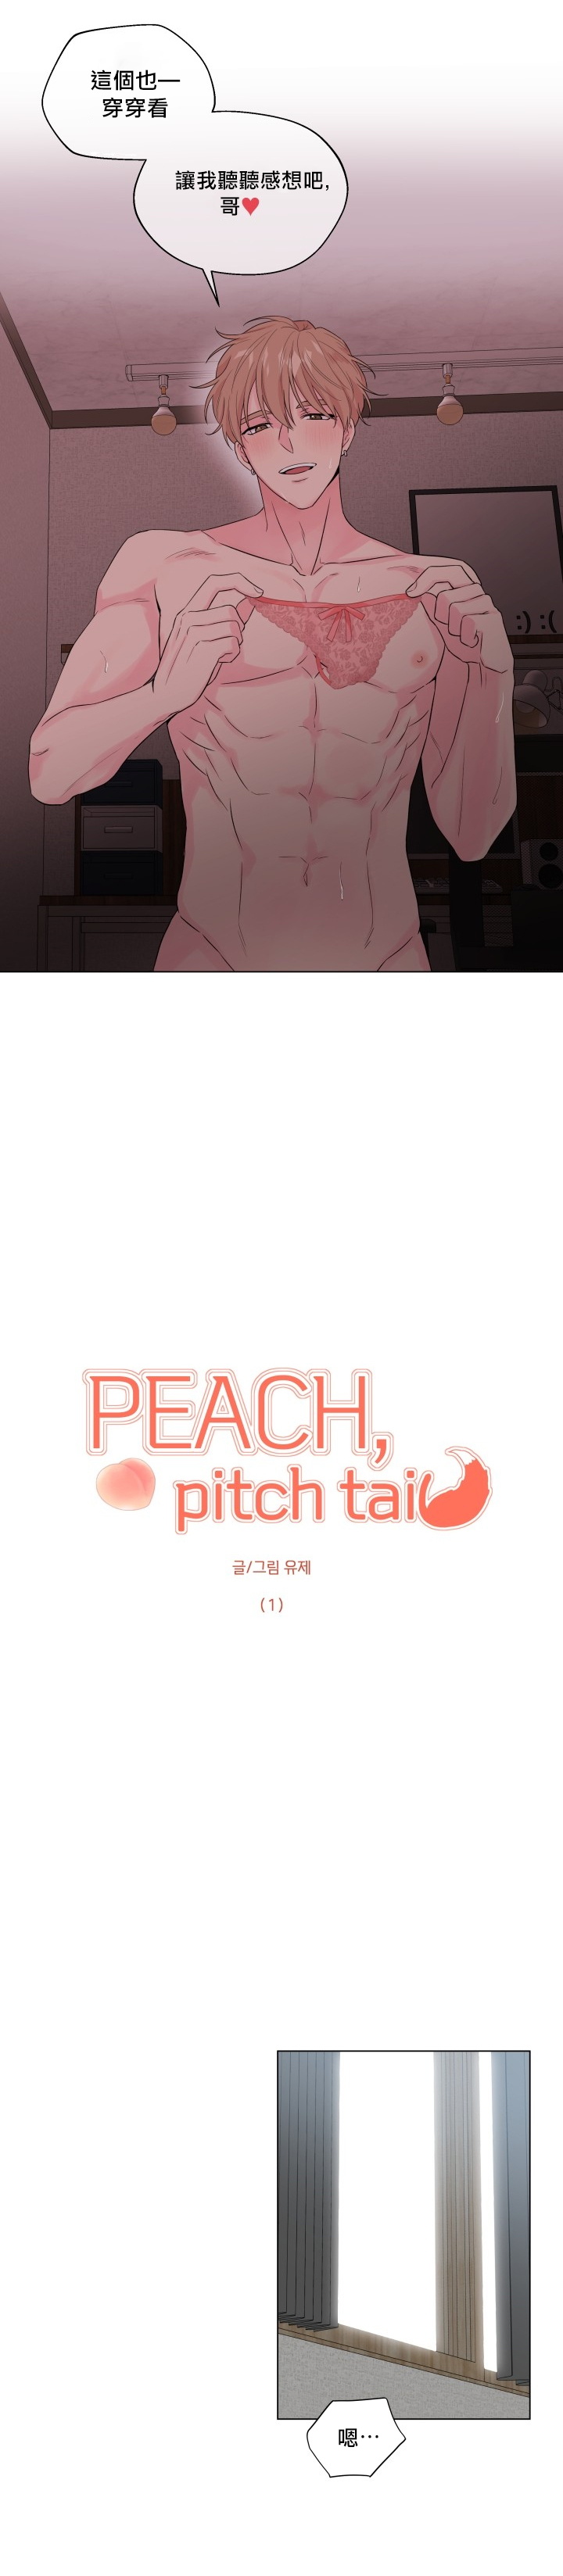 [Yuje] 奇妙玩具来袭 Peach, Pitch Tail 01 [Chinese] 피치, 핏치 테일